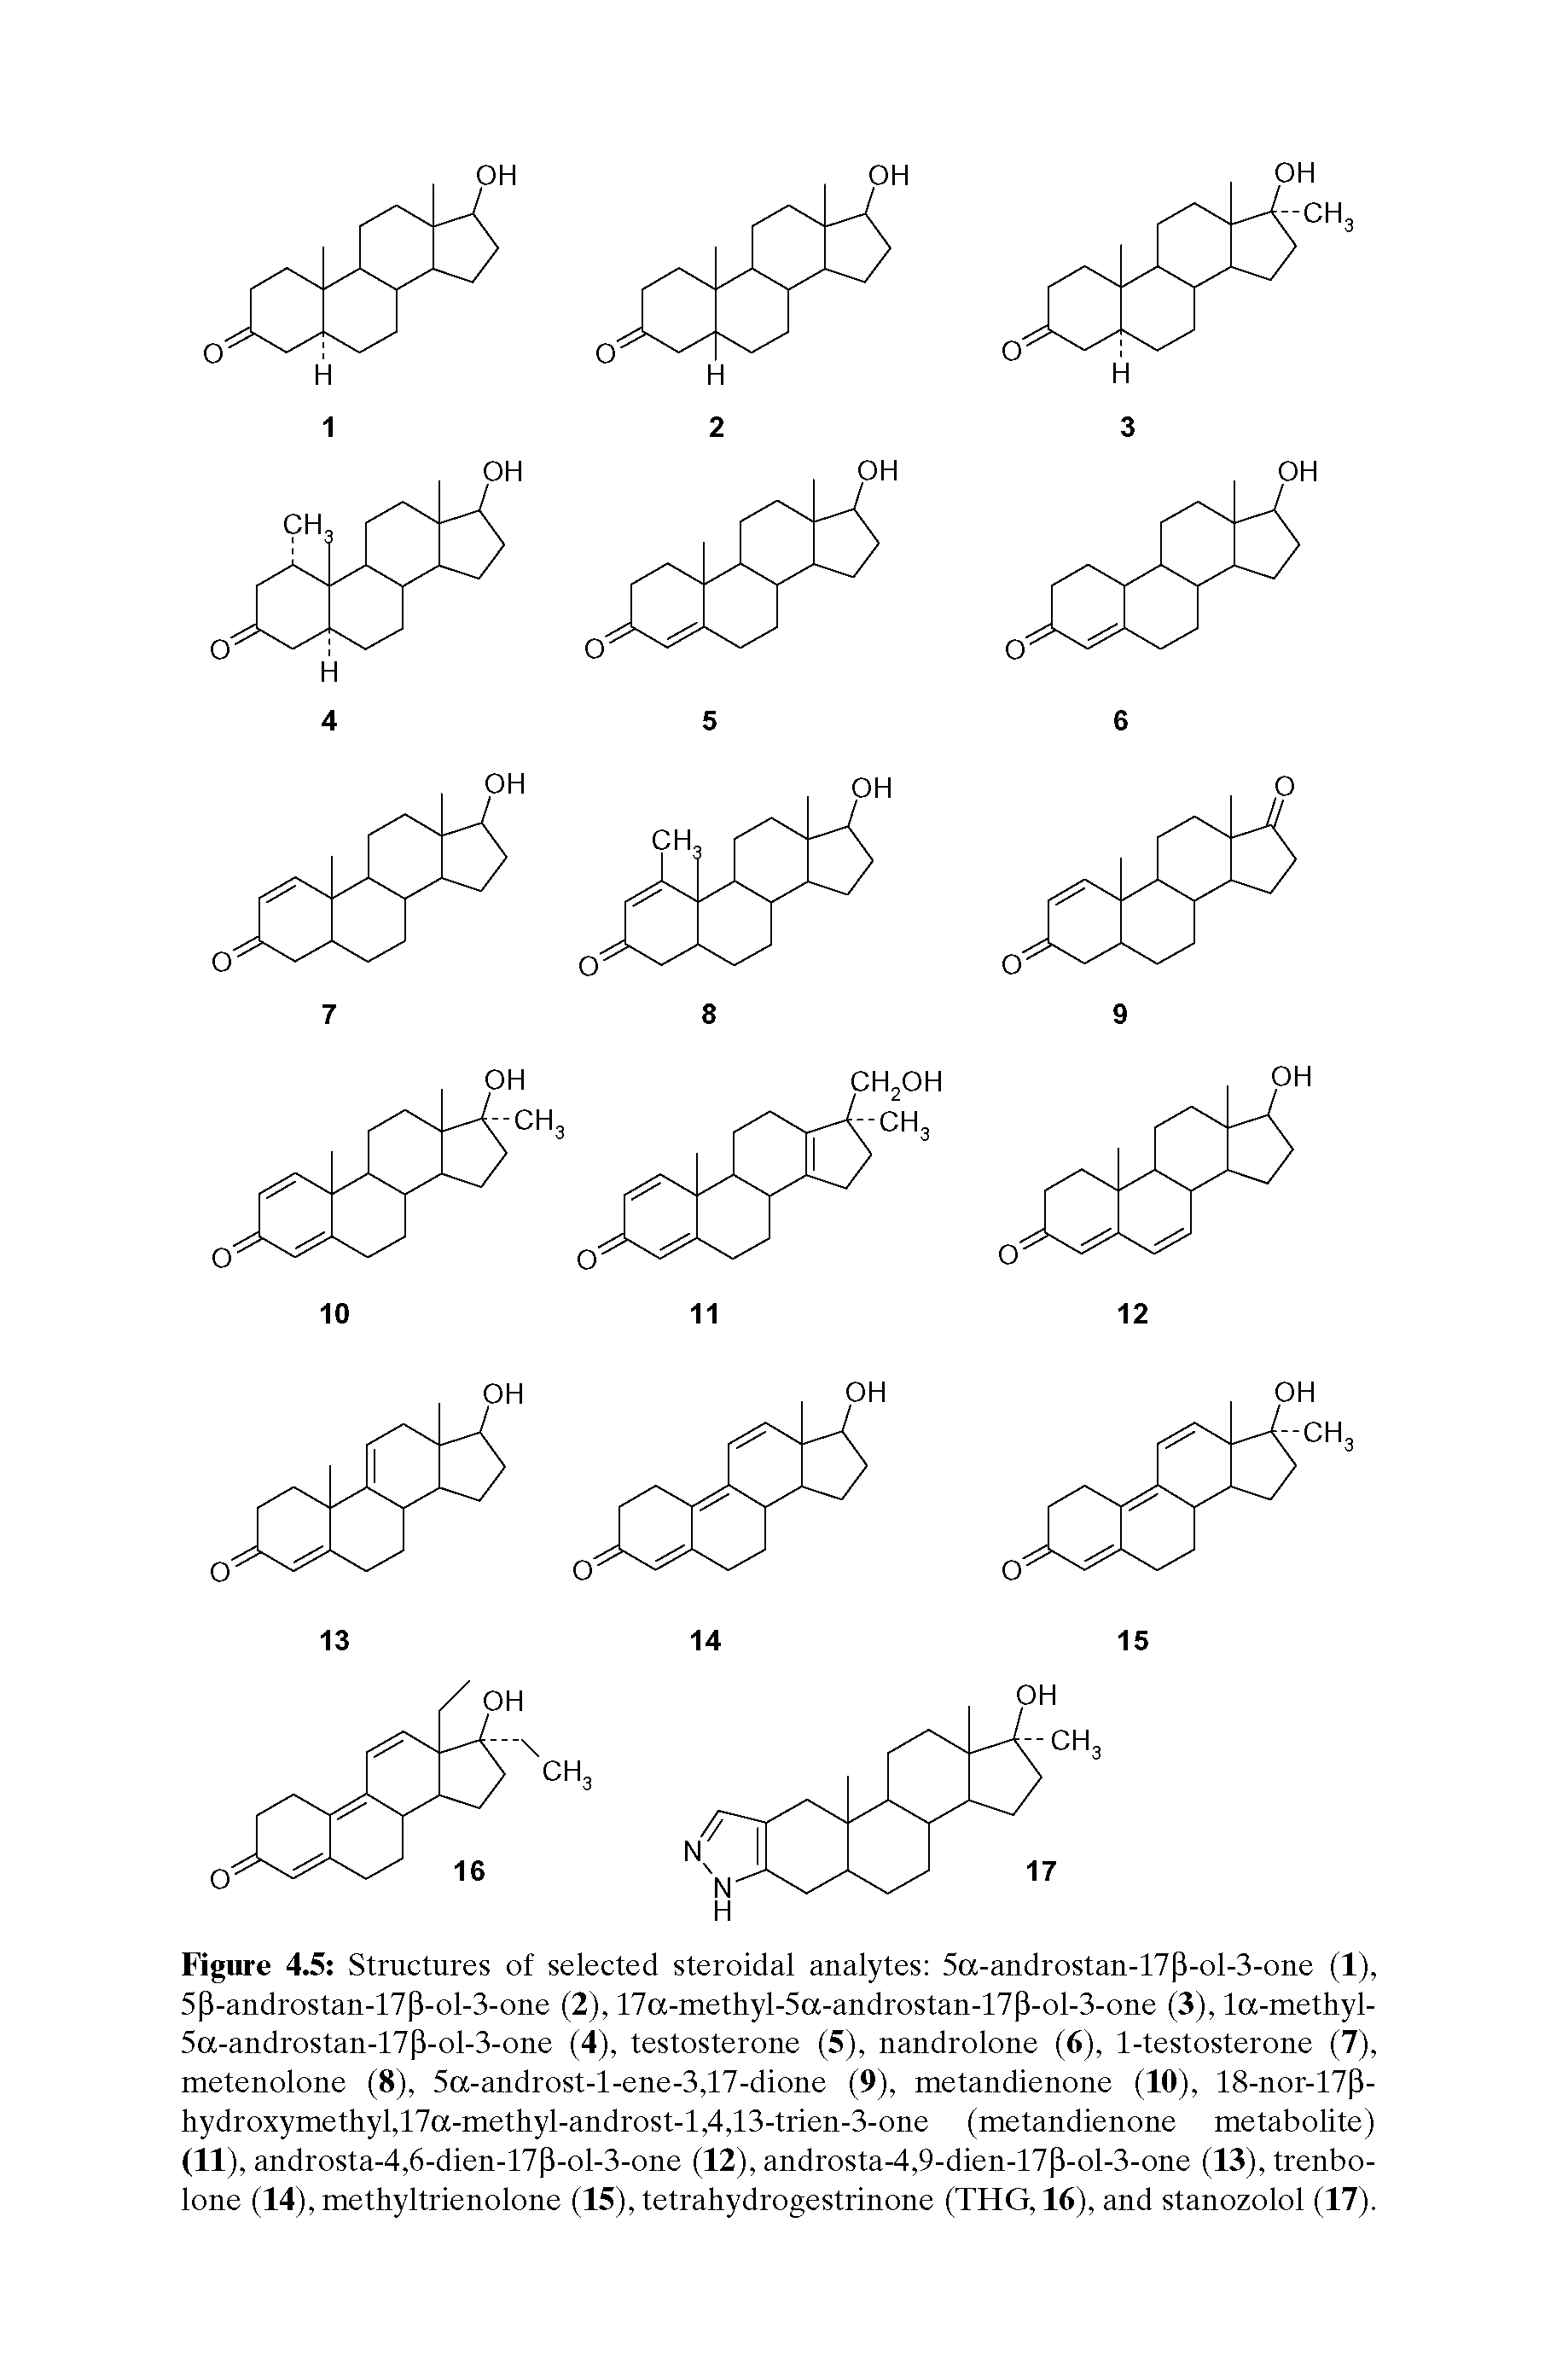 Figure 4.5 Structures of selected steroidal analytes 5a-androstan-17P-ol-3-one (1), 5P-androstan-17P-ol-3-one (2), 17a-methyl-5a-androstan-17P-ol-3-one (3), la-methyl-5a-androstan-17P-ol-3-one (4), testosterone (5), nandrolone (6), 1-testosterone (7), metenolone (8), 5a-androst-l-ene-3,17-dione (9), metandienone (10), 18-nor-17P-hydroxymethyl,17a-methyl-androst-l,4,13-trien-3-one (metandienone metabolite) (11), androsta-4,6-dien-17P-ol-3-one (12), androsta-4,9-dien-17P-ol-3-one (13), trenbo-lone (14), methyltrienolone (15), tetrahydrogestrinone (THG, 16), and stanozolol (17).